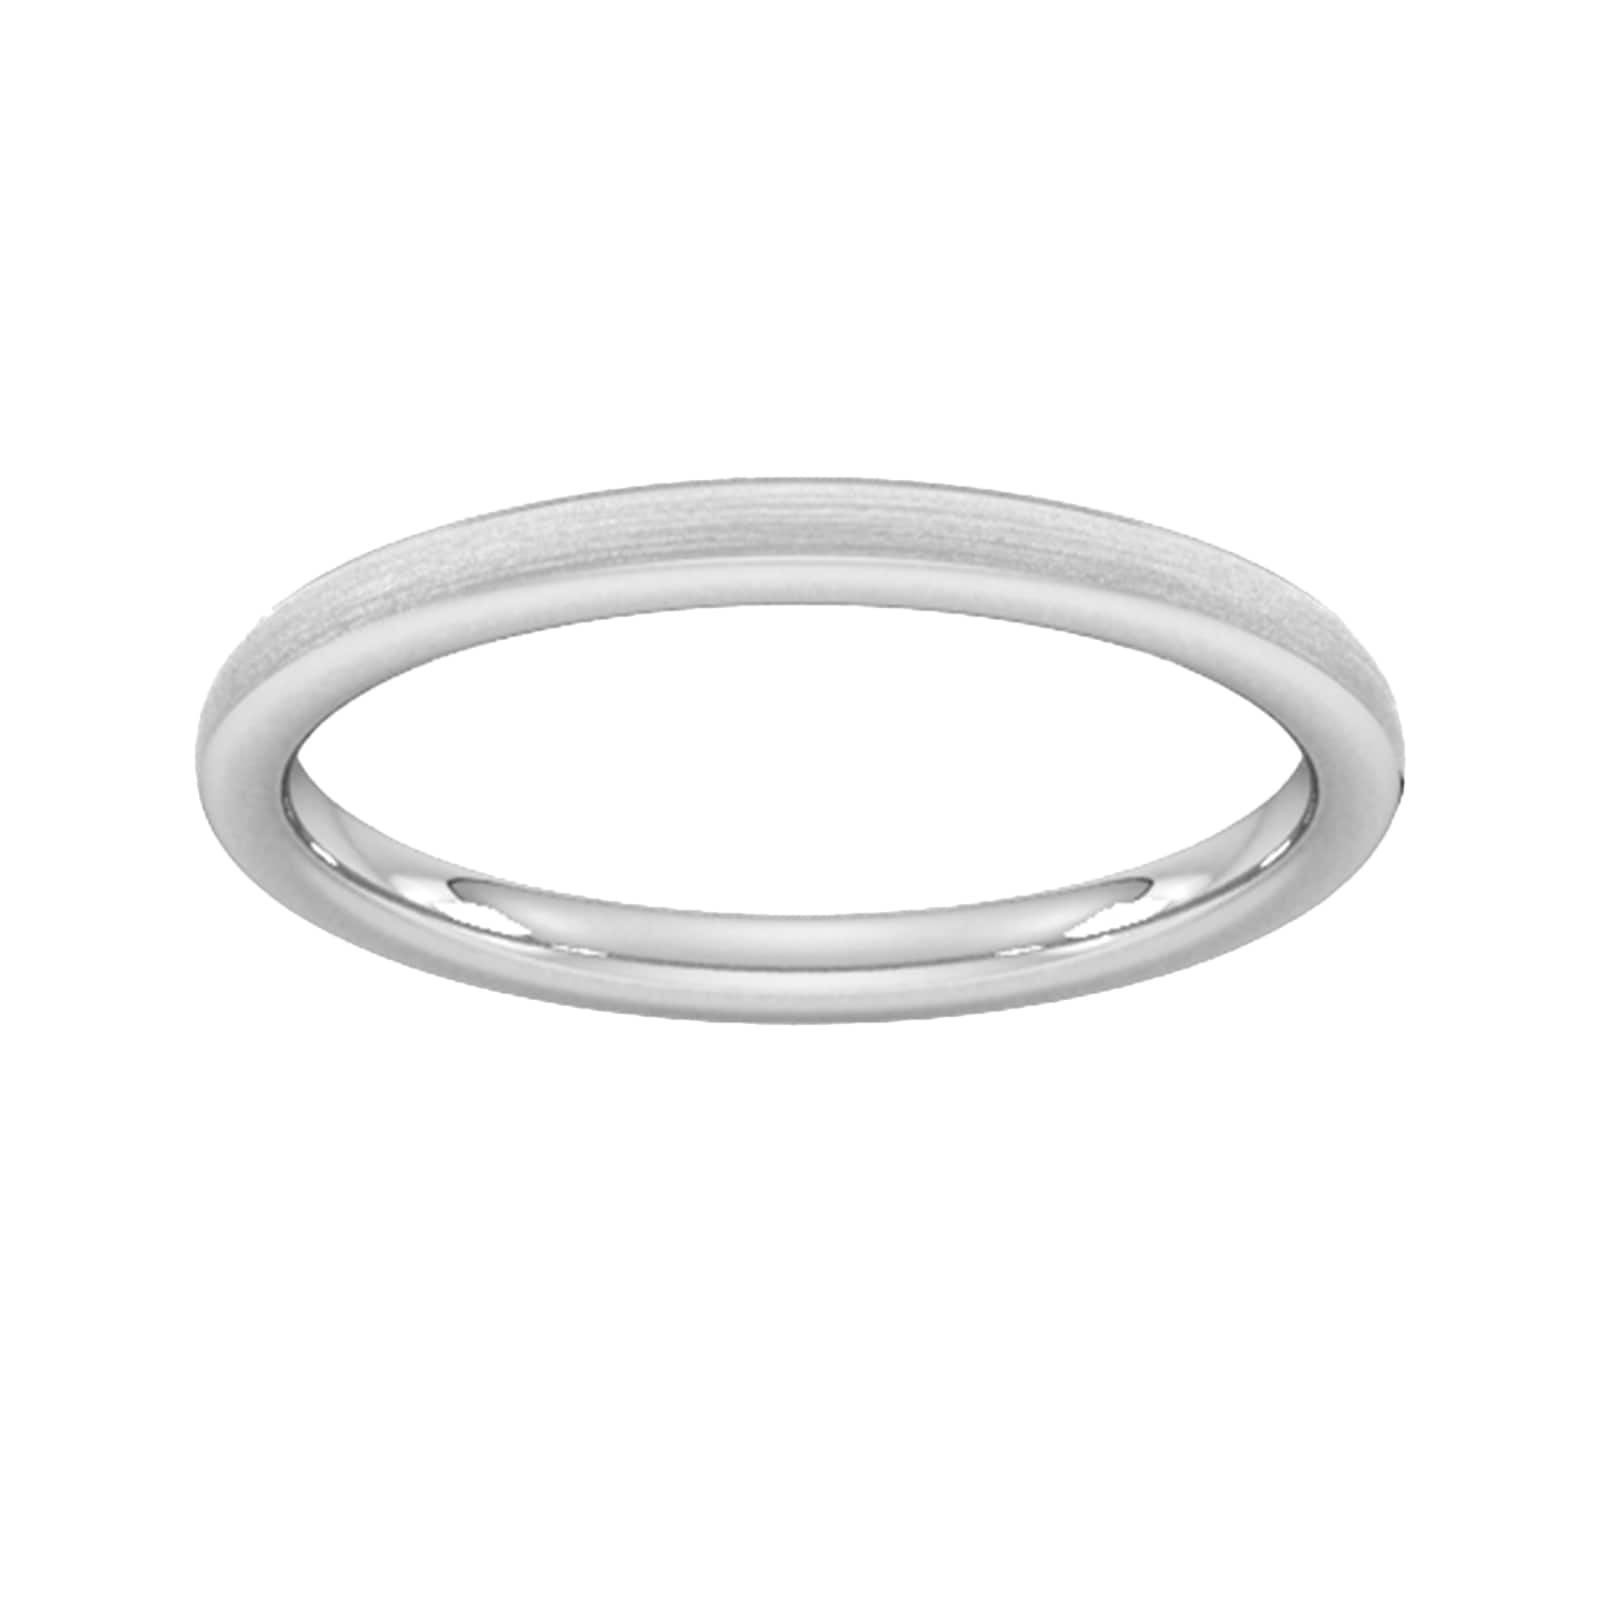 2mm slight court extra heavy matt finished wedding ring in 18 carat white gold - ring size n